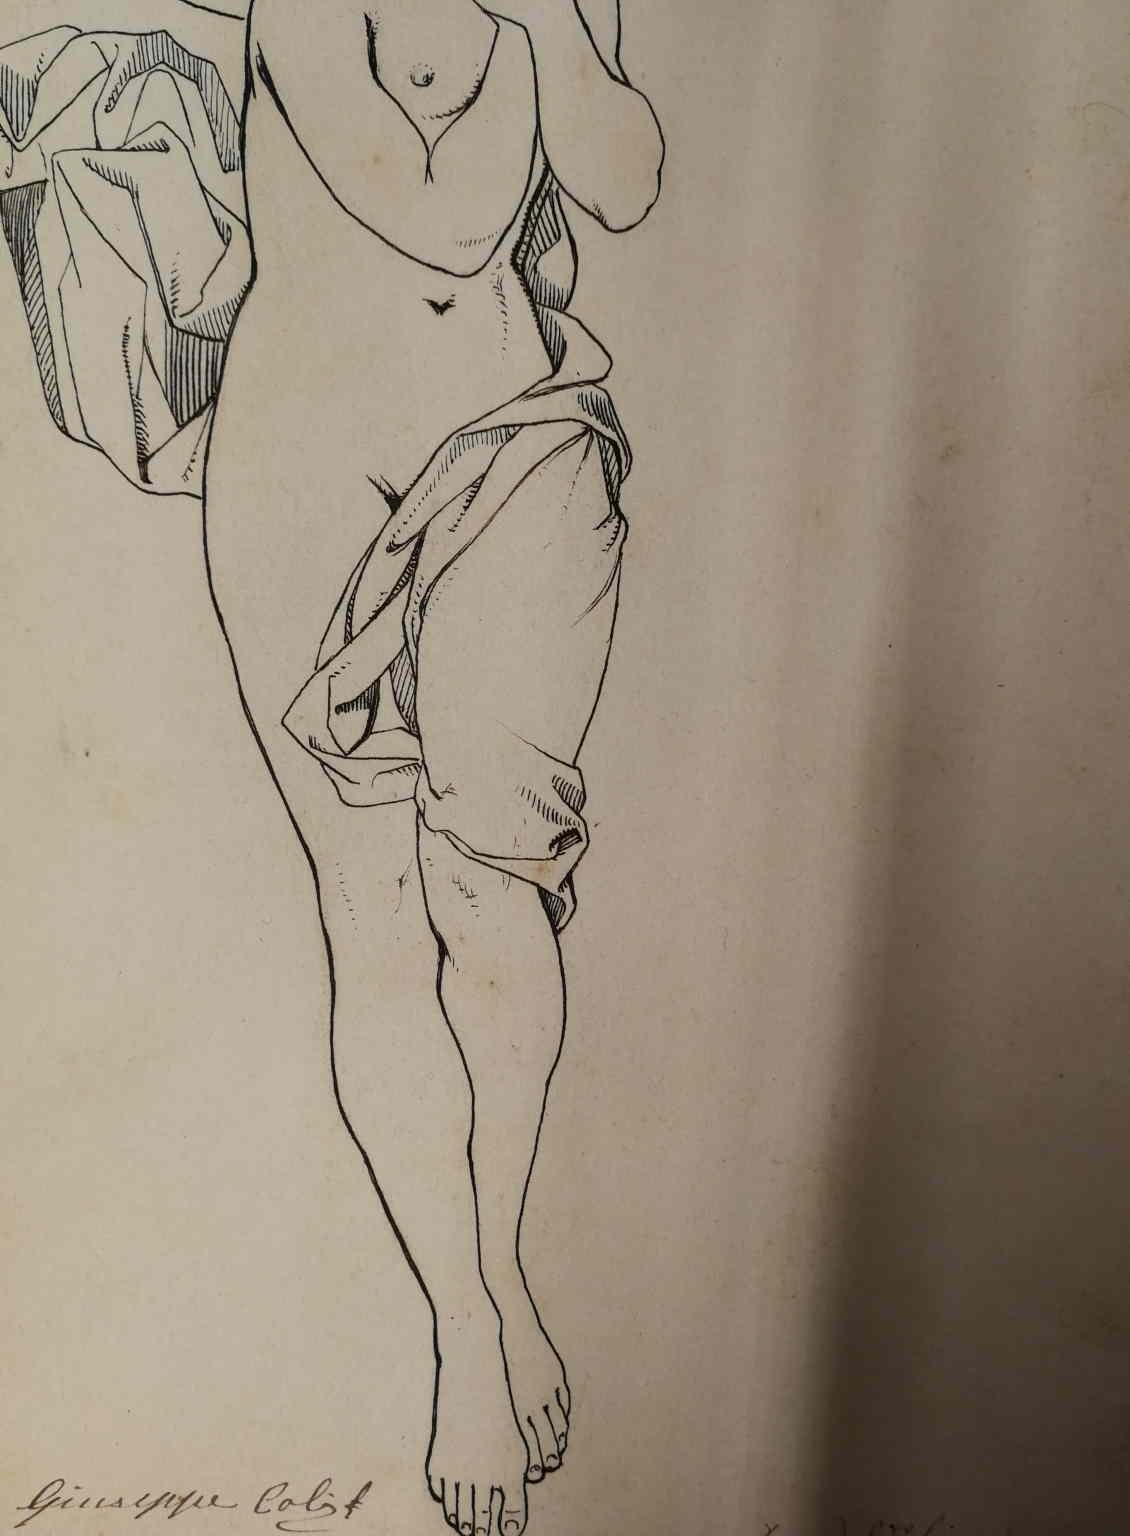 Giuseppe Calì, Psyche, end 19th-early 20th, ink on paper, signed 3